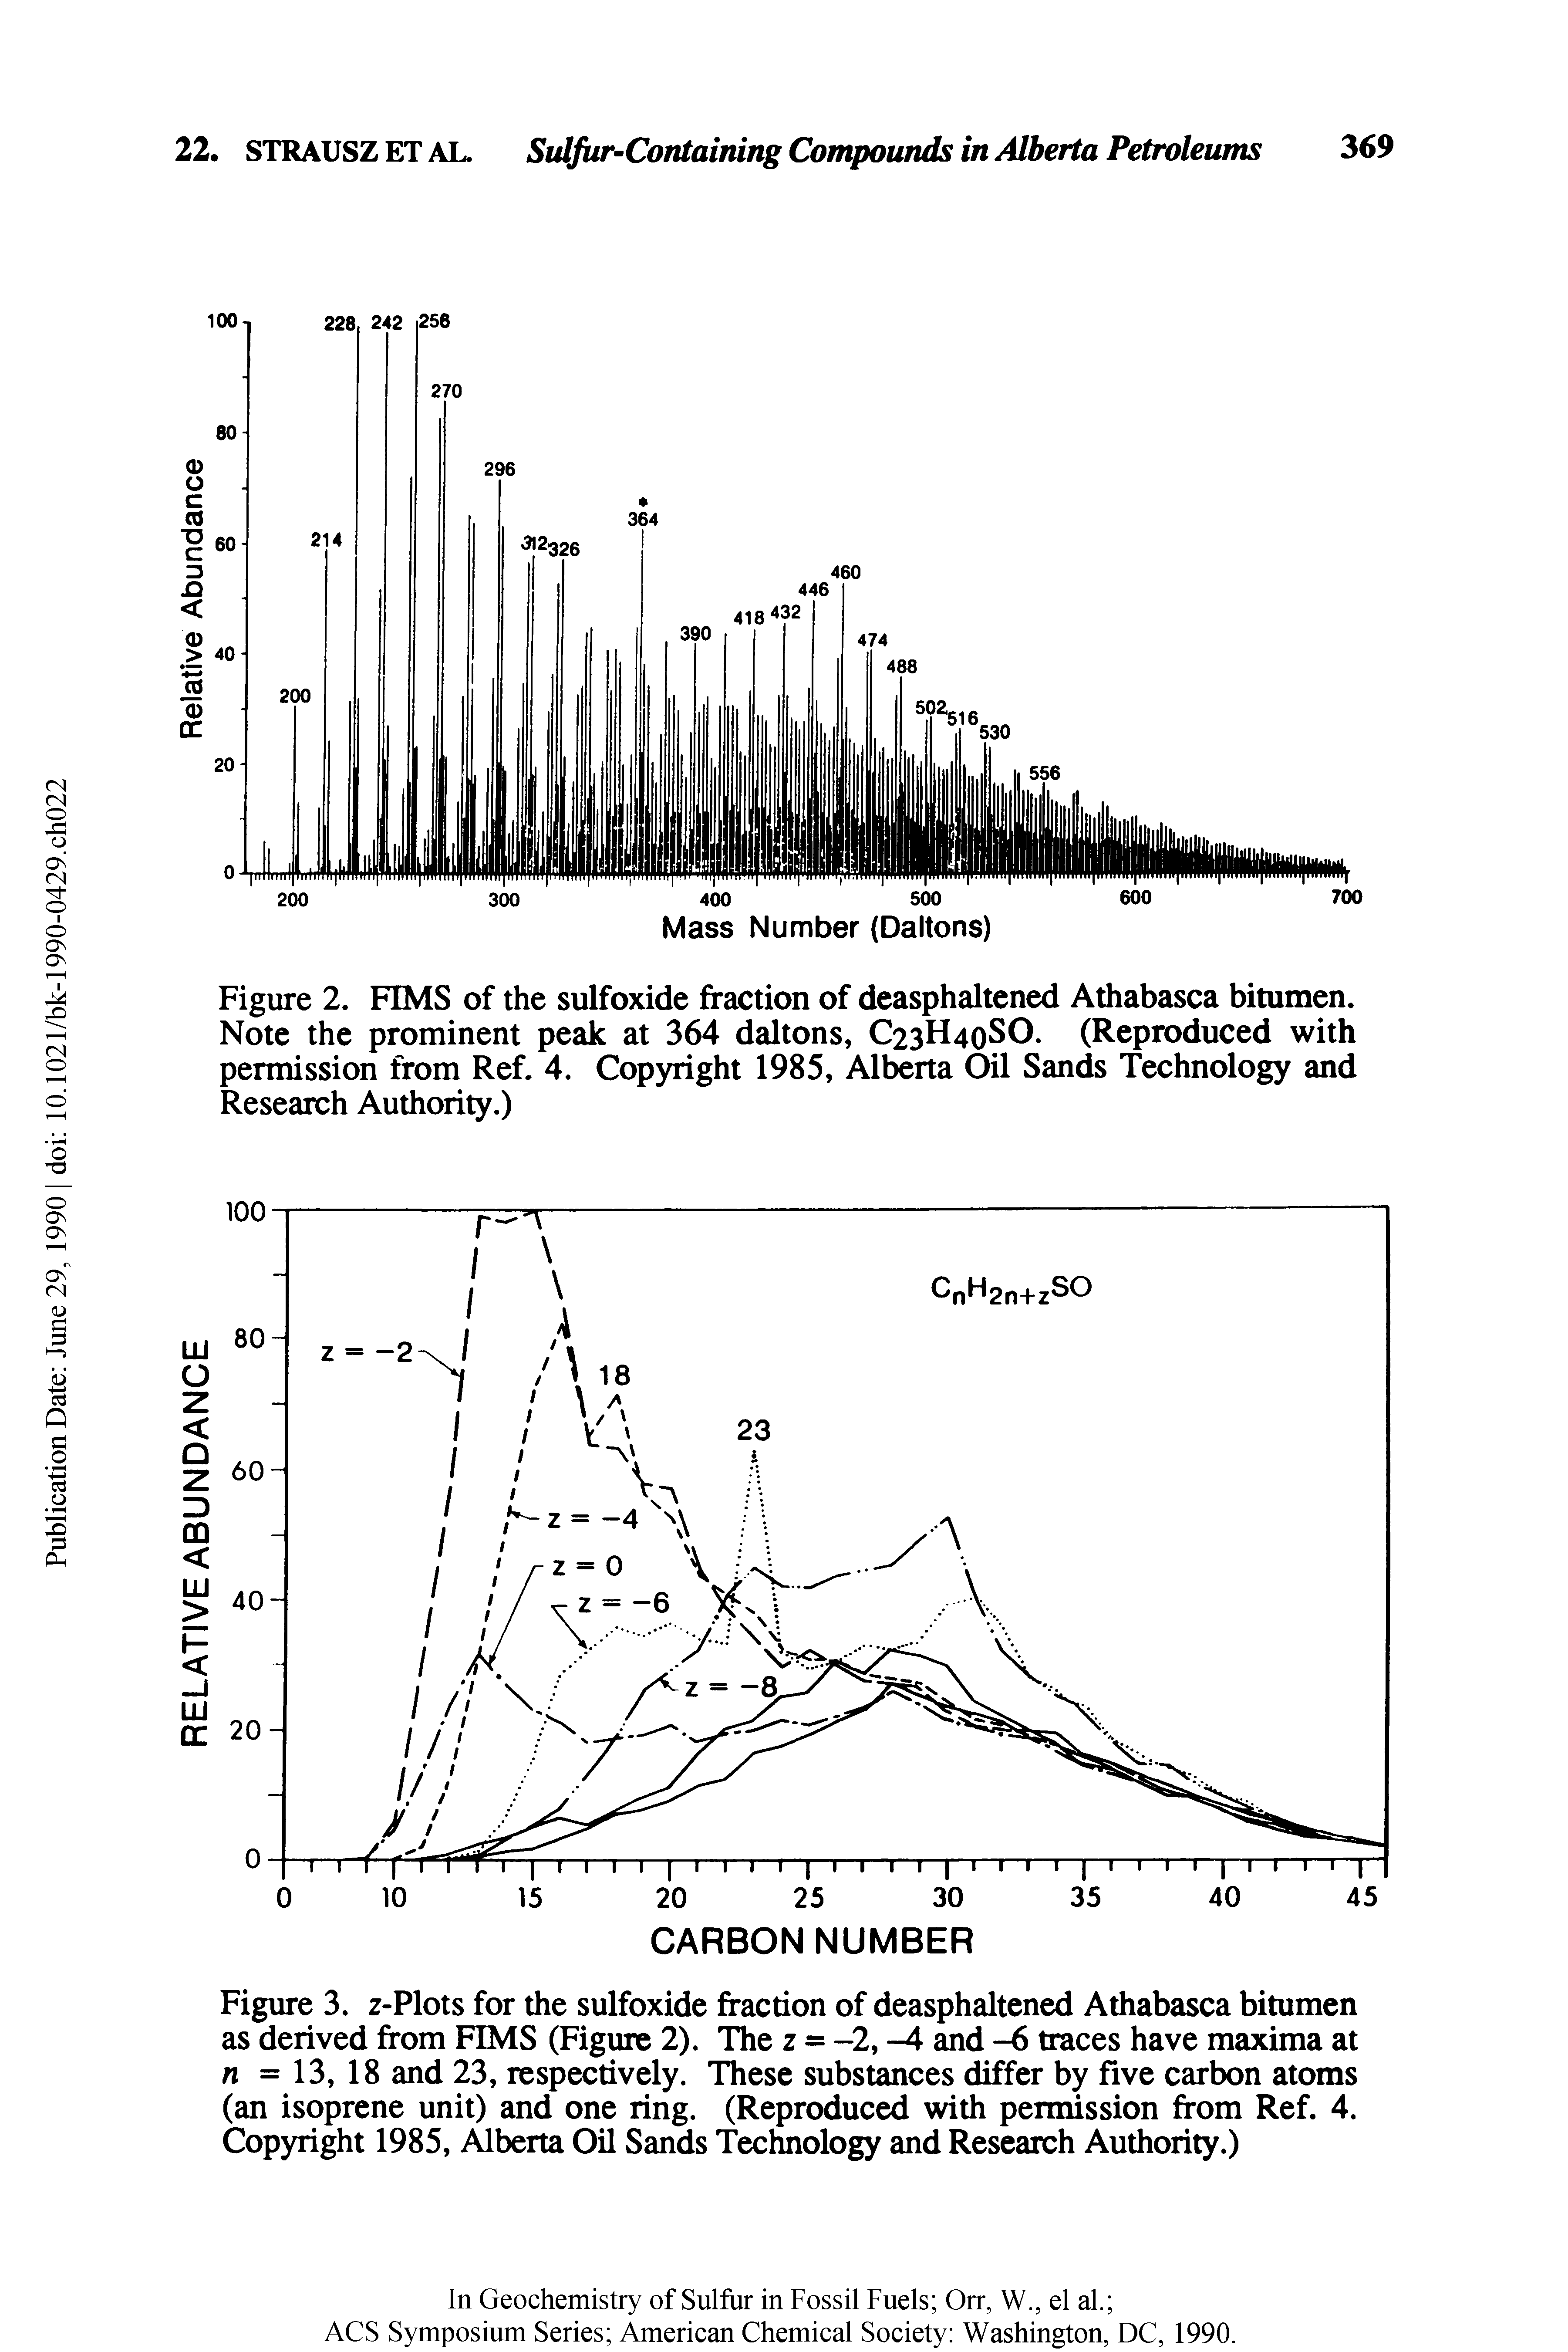 Figure 2. FIMS of the sulfoxide fraction of deasphaltened Athabasca bitumen. Note the prominent peak at 364 daltons, C23H40SO. (Reproduced with permission from Ref. 4. Copyright 1985, Alberta Oil Sands Technology and Research Authority.)...